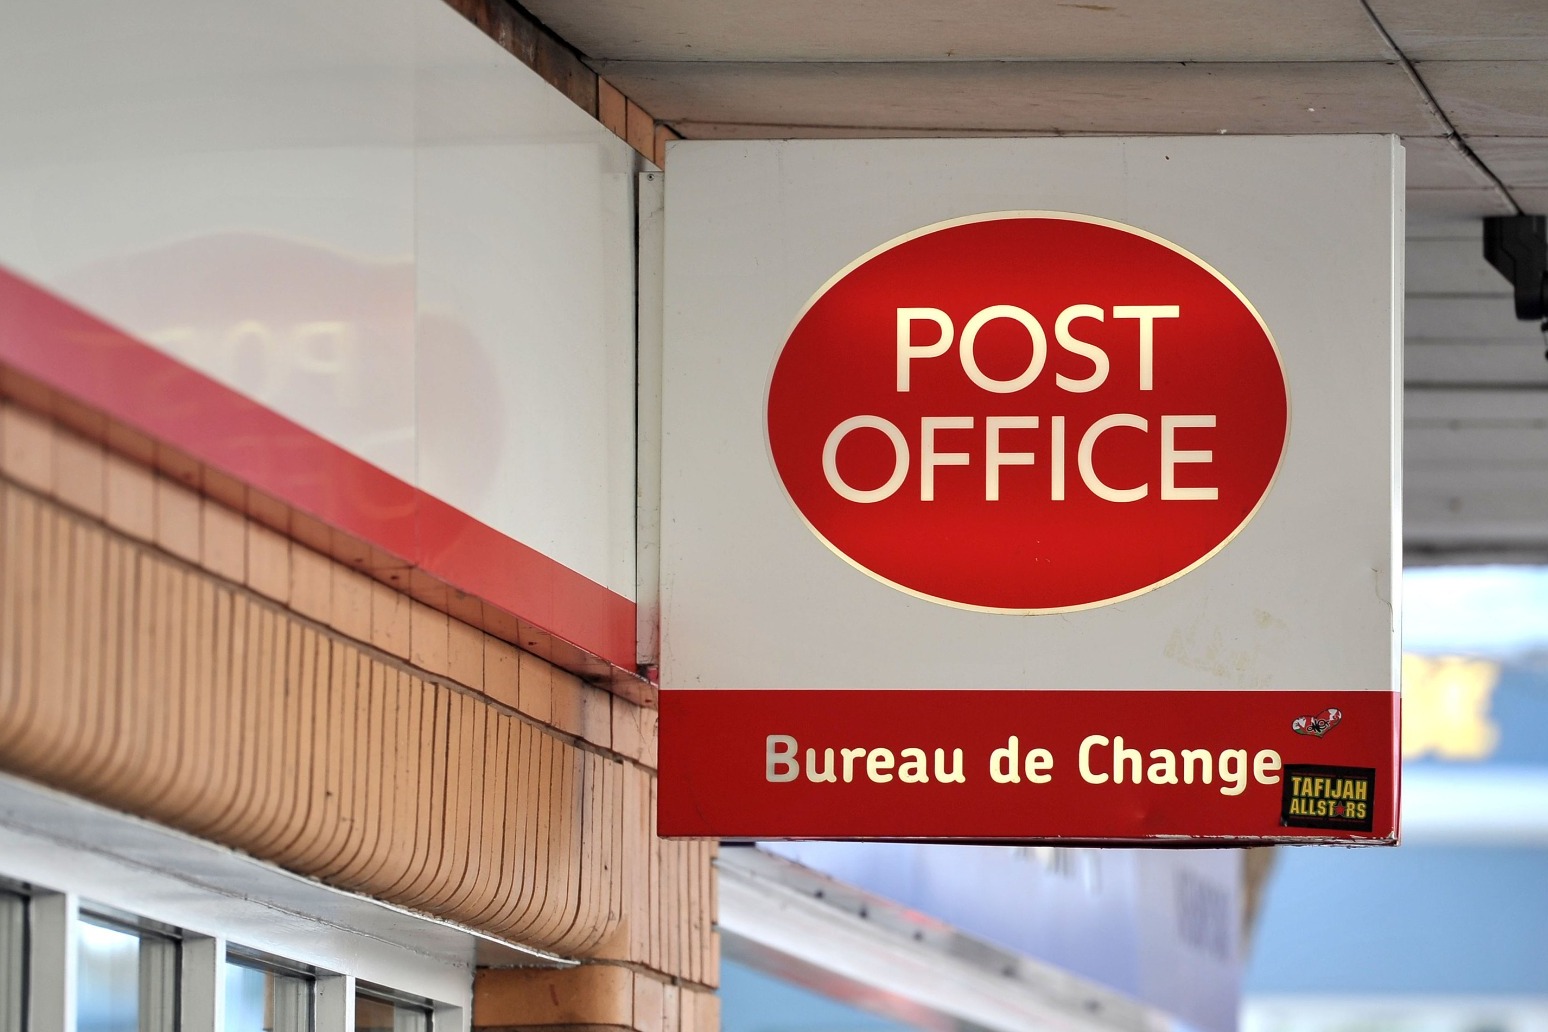 Post Office workers staging 24-hour strike in pay row 